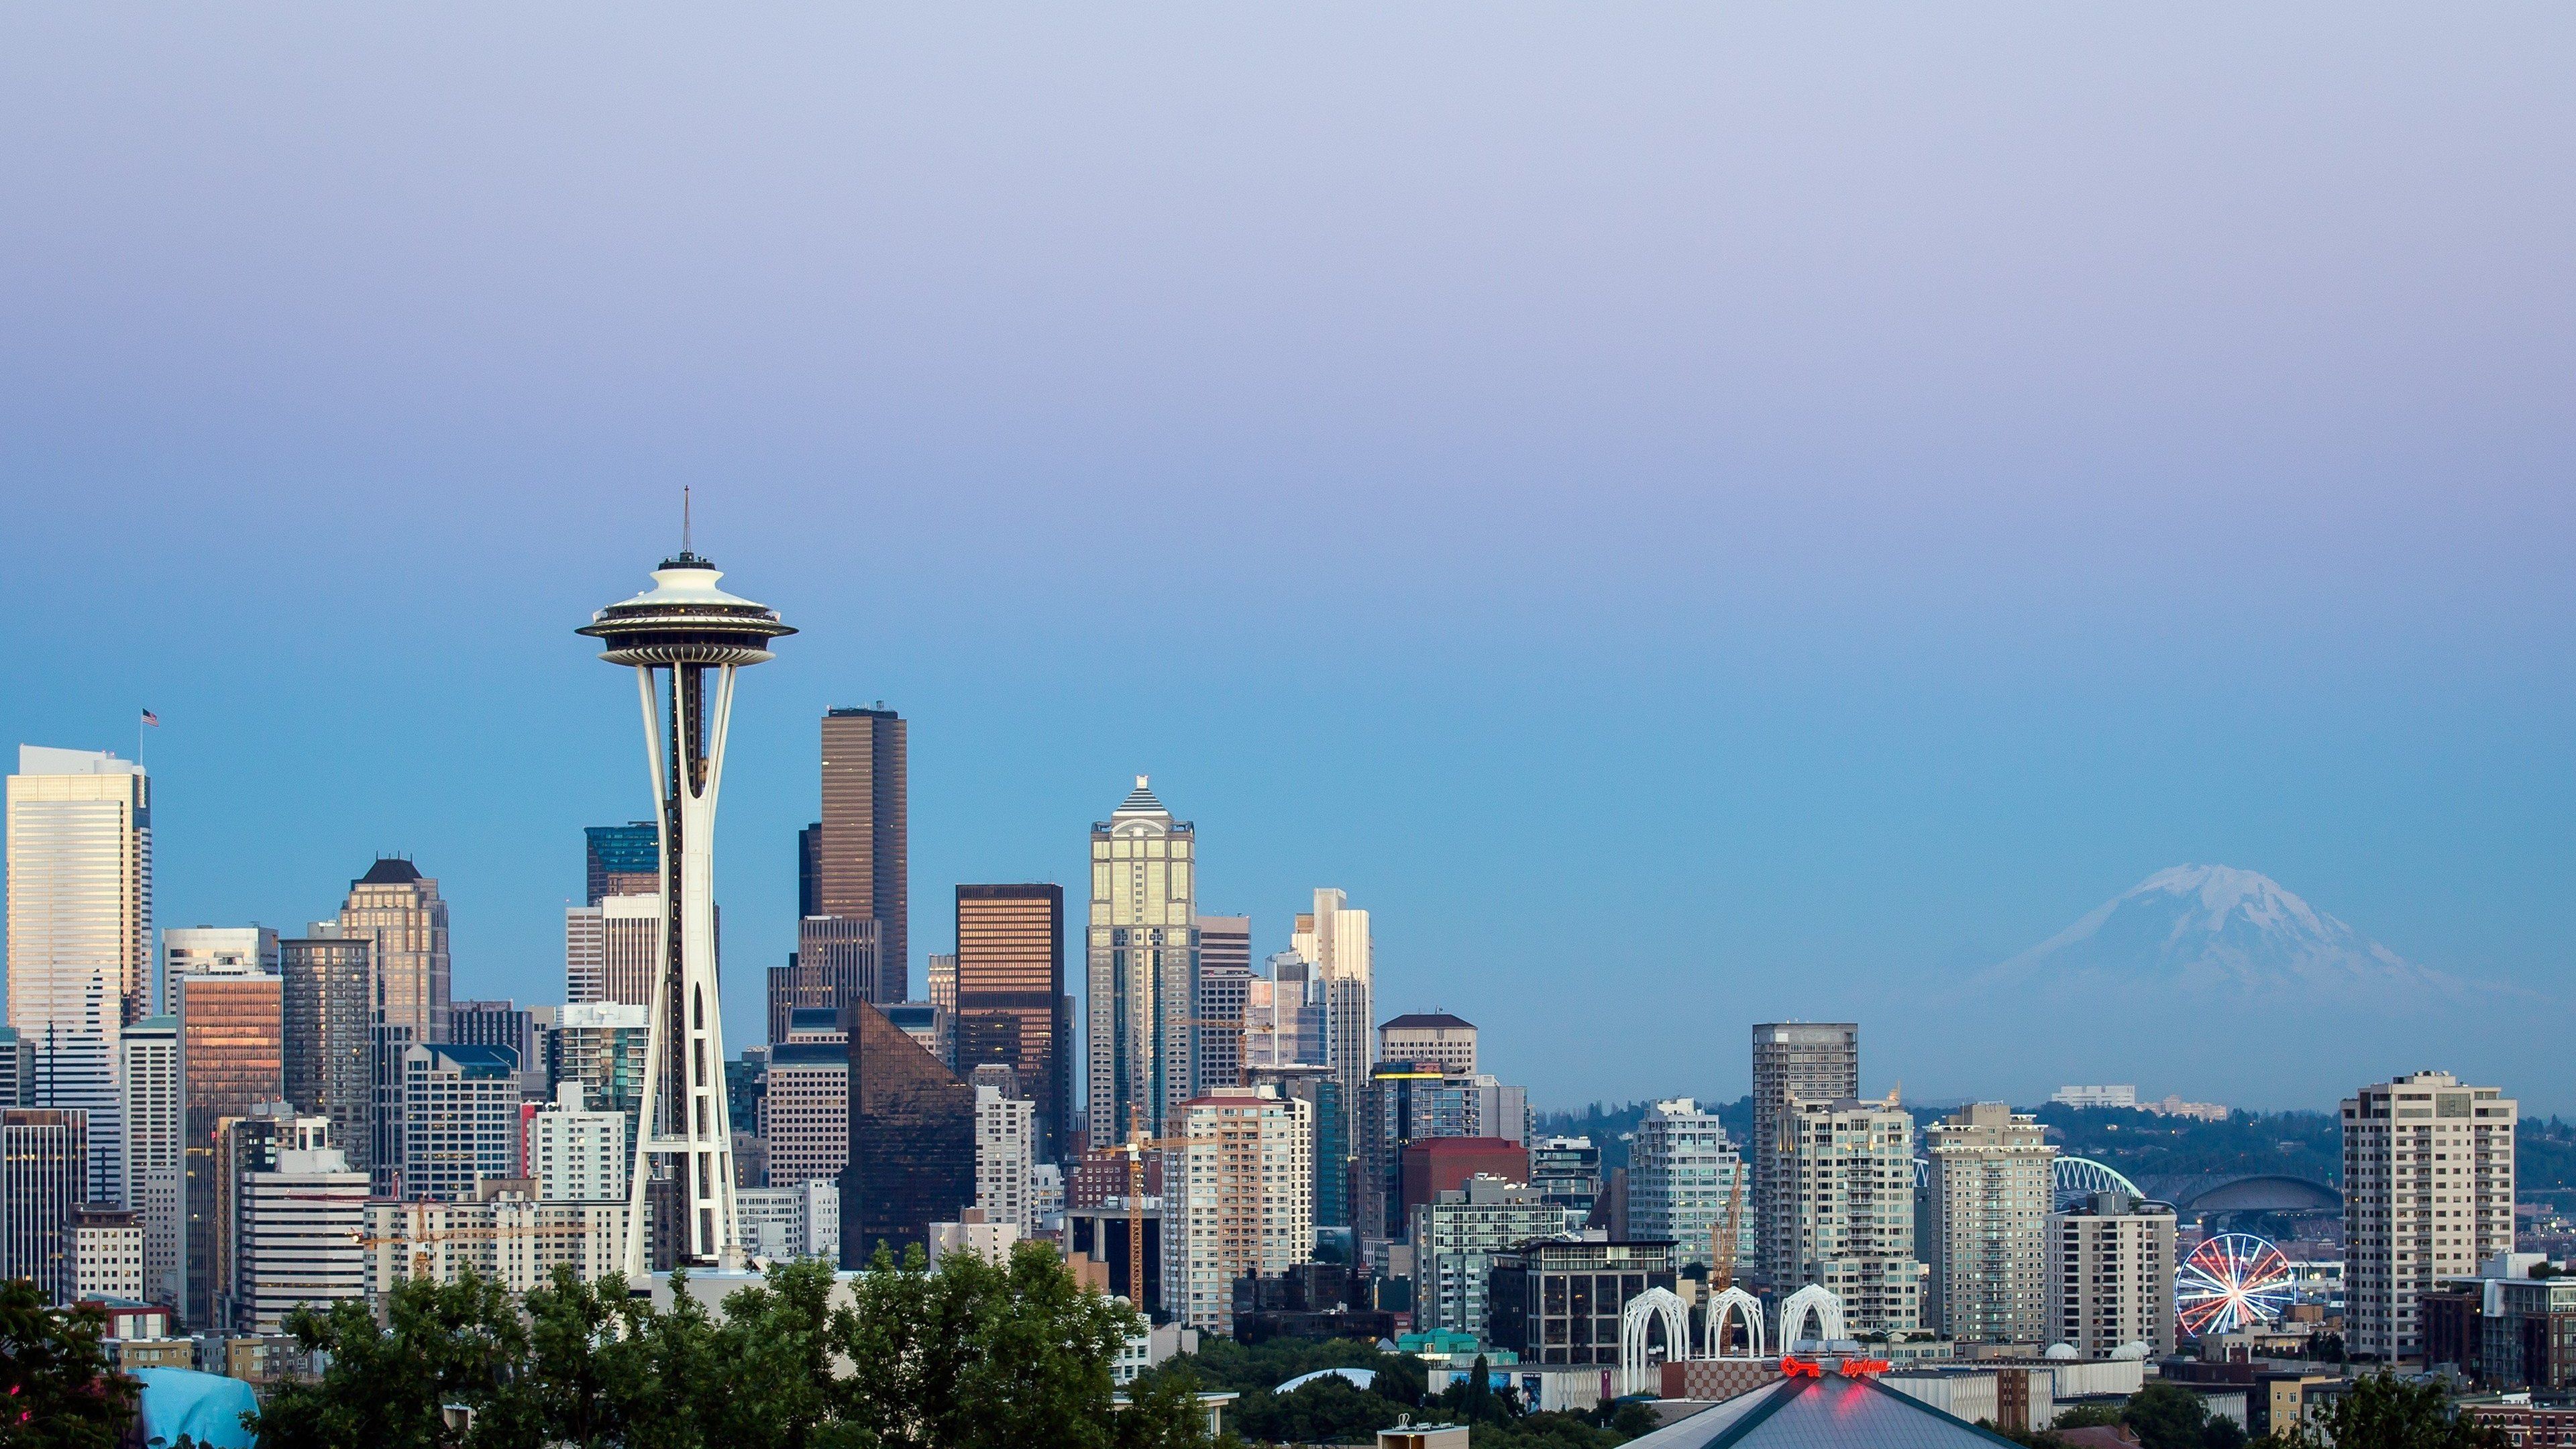 25 Seattle HD Wallpapers | Backgrounds - Wallpaper Abyss